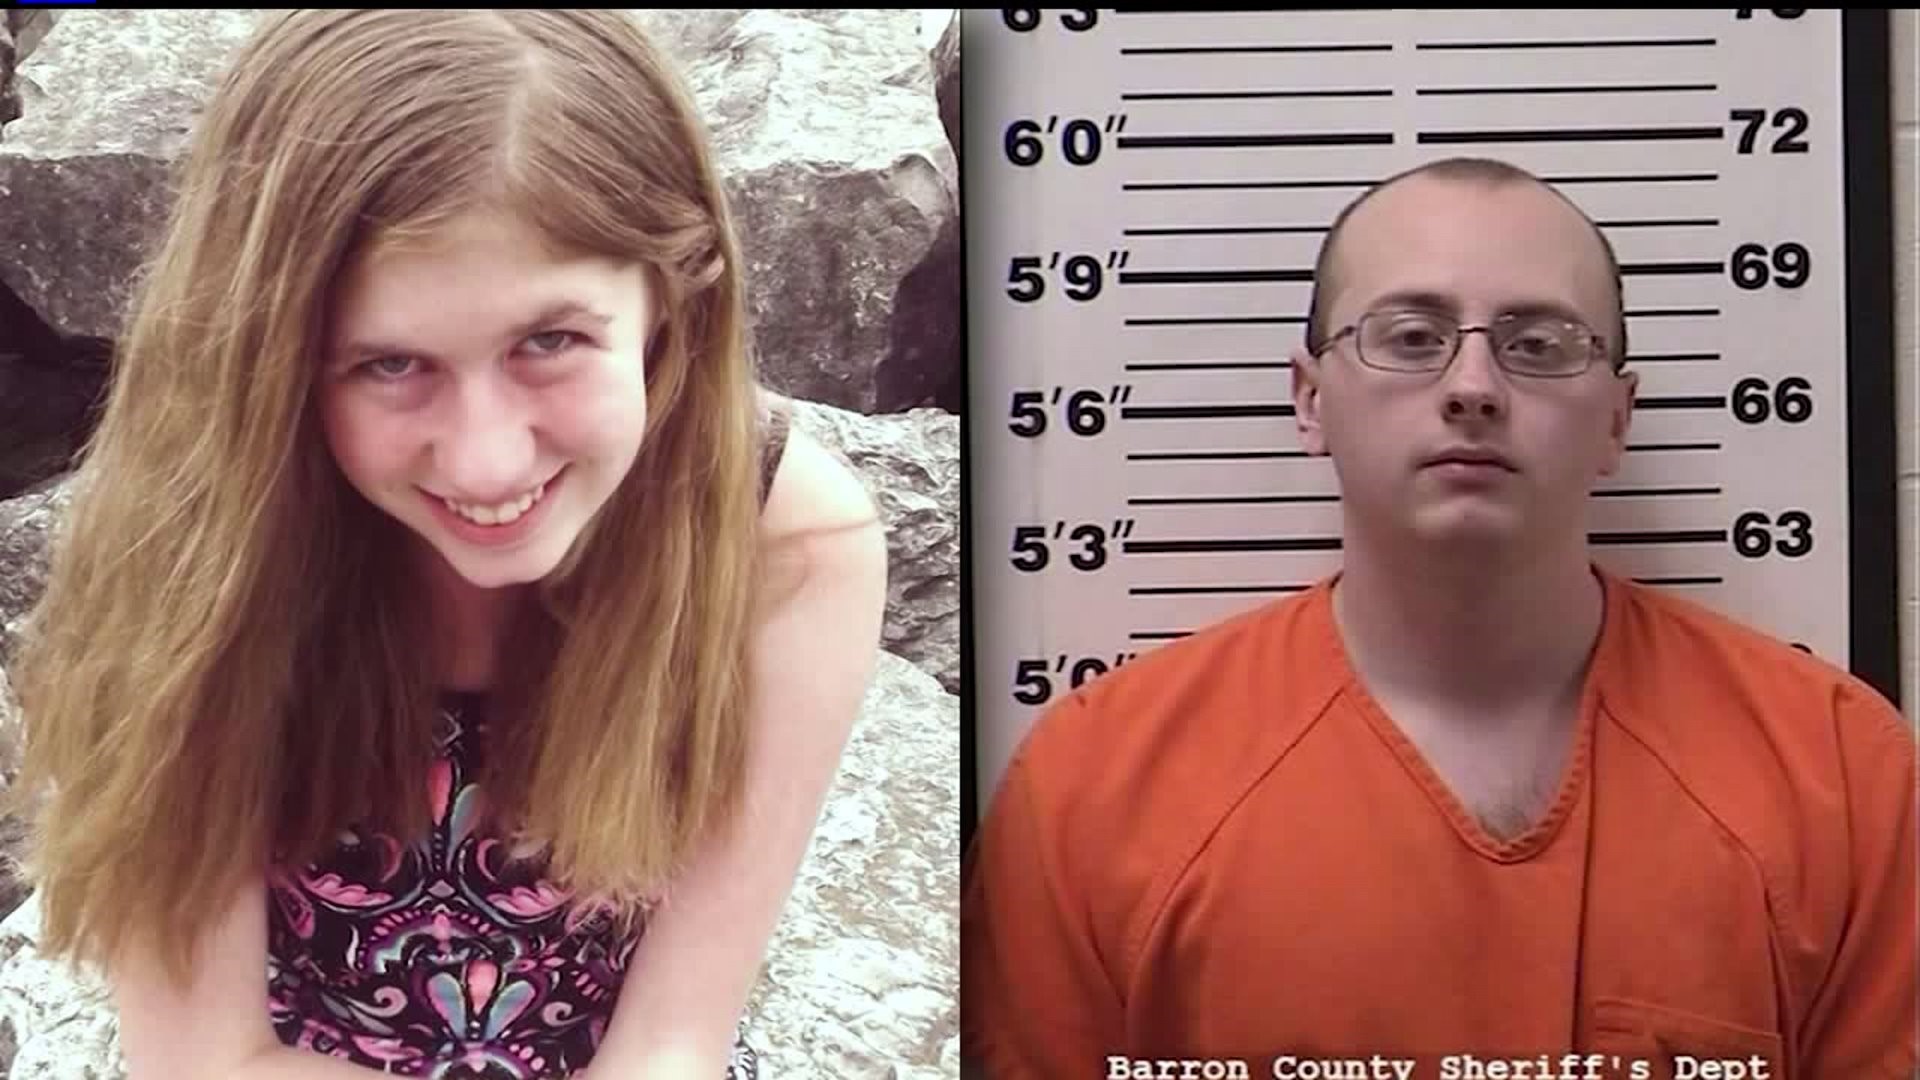 Jayme Closs` kidnapper pleads guilty to intentional homicide and kidnapping charges